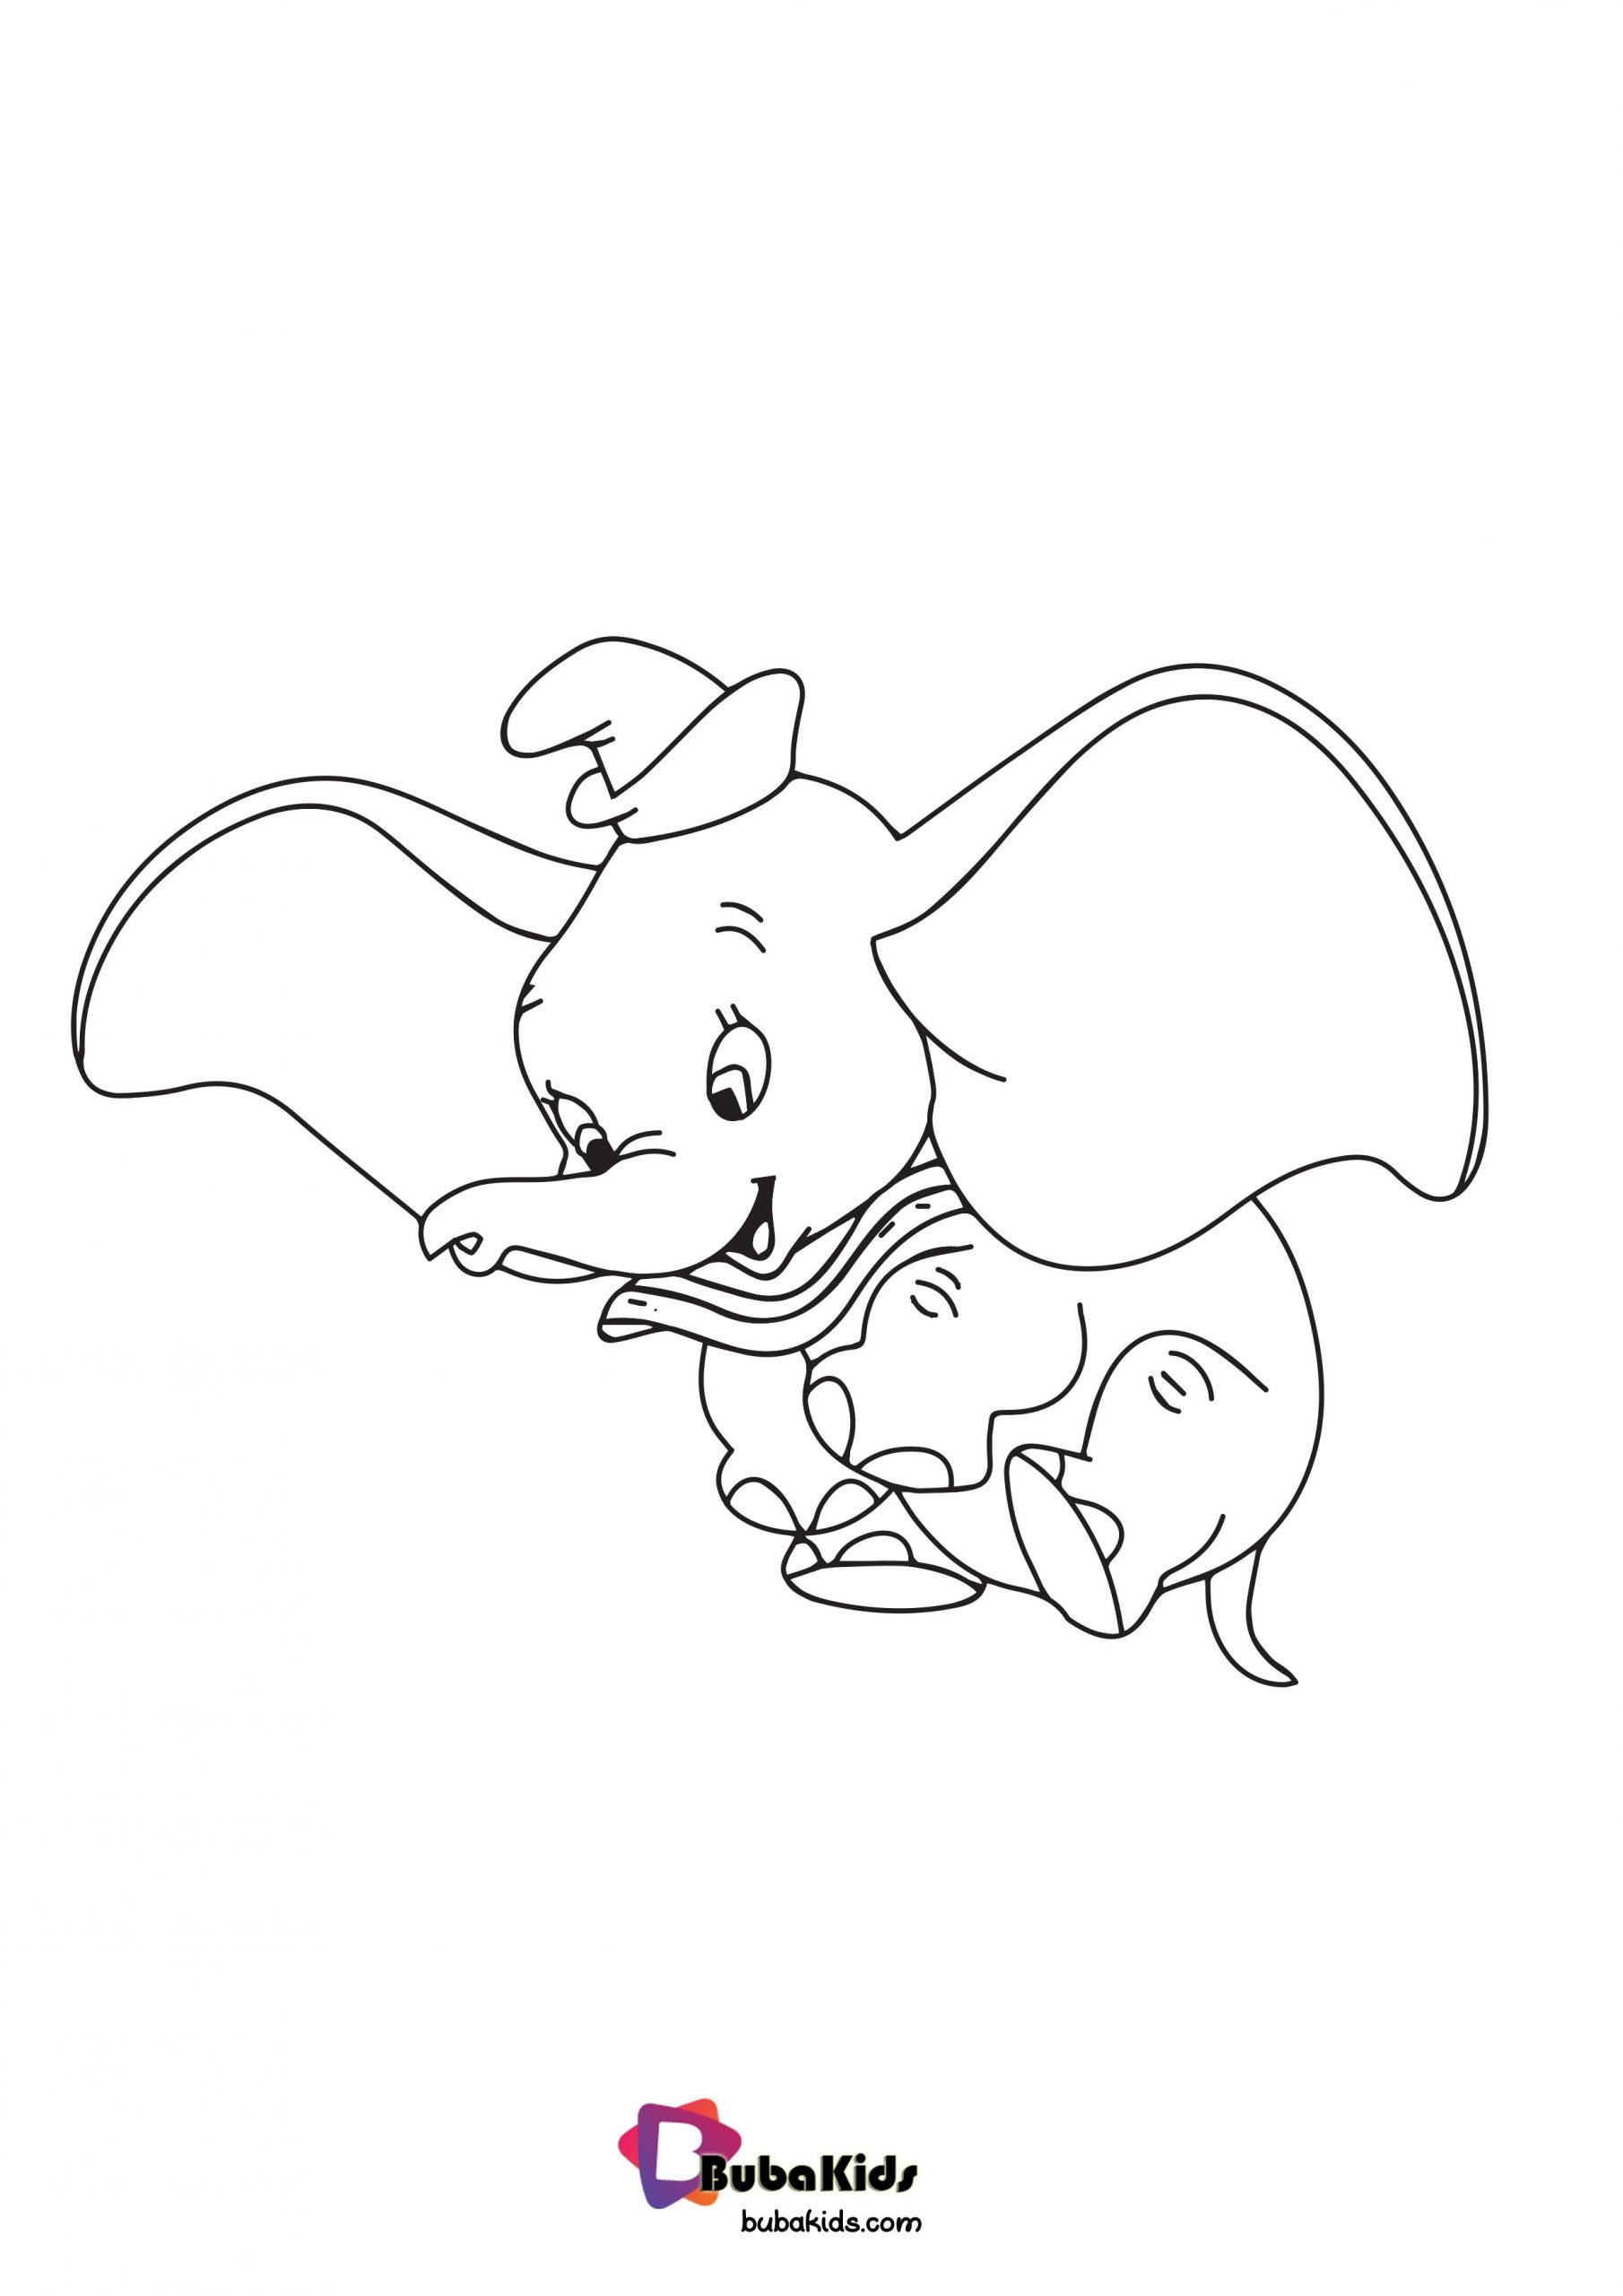 cute dumbo coloring page  bubakids